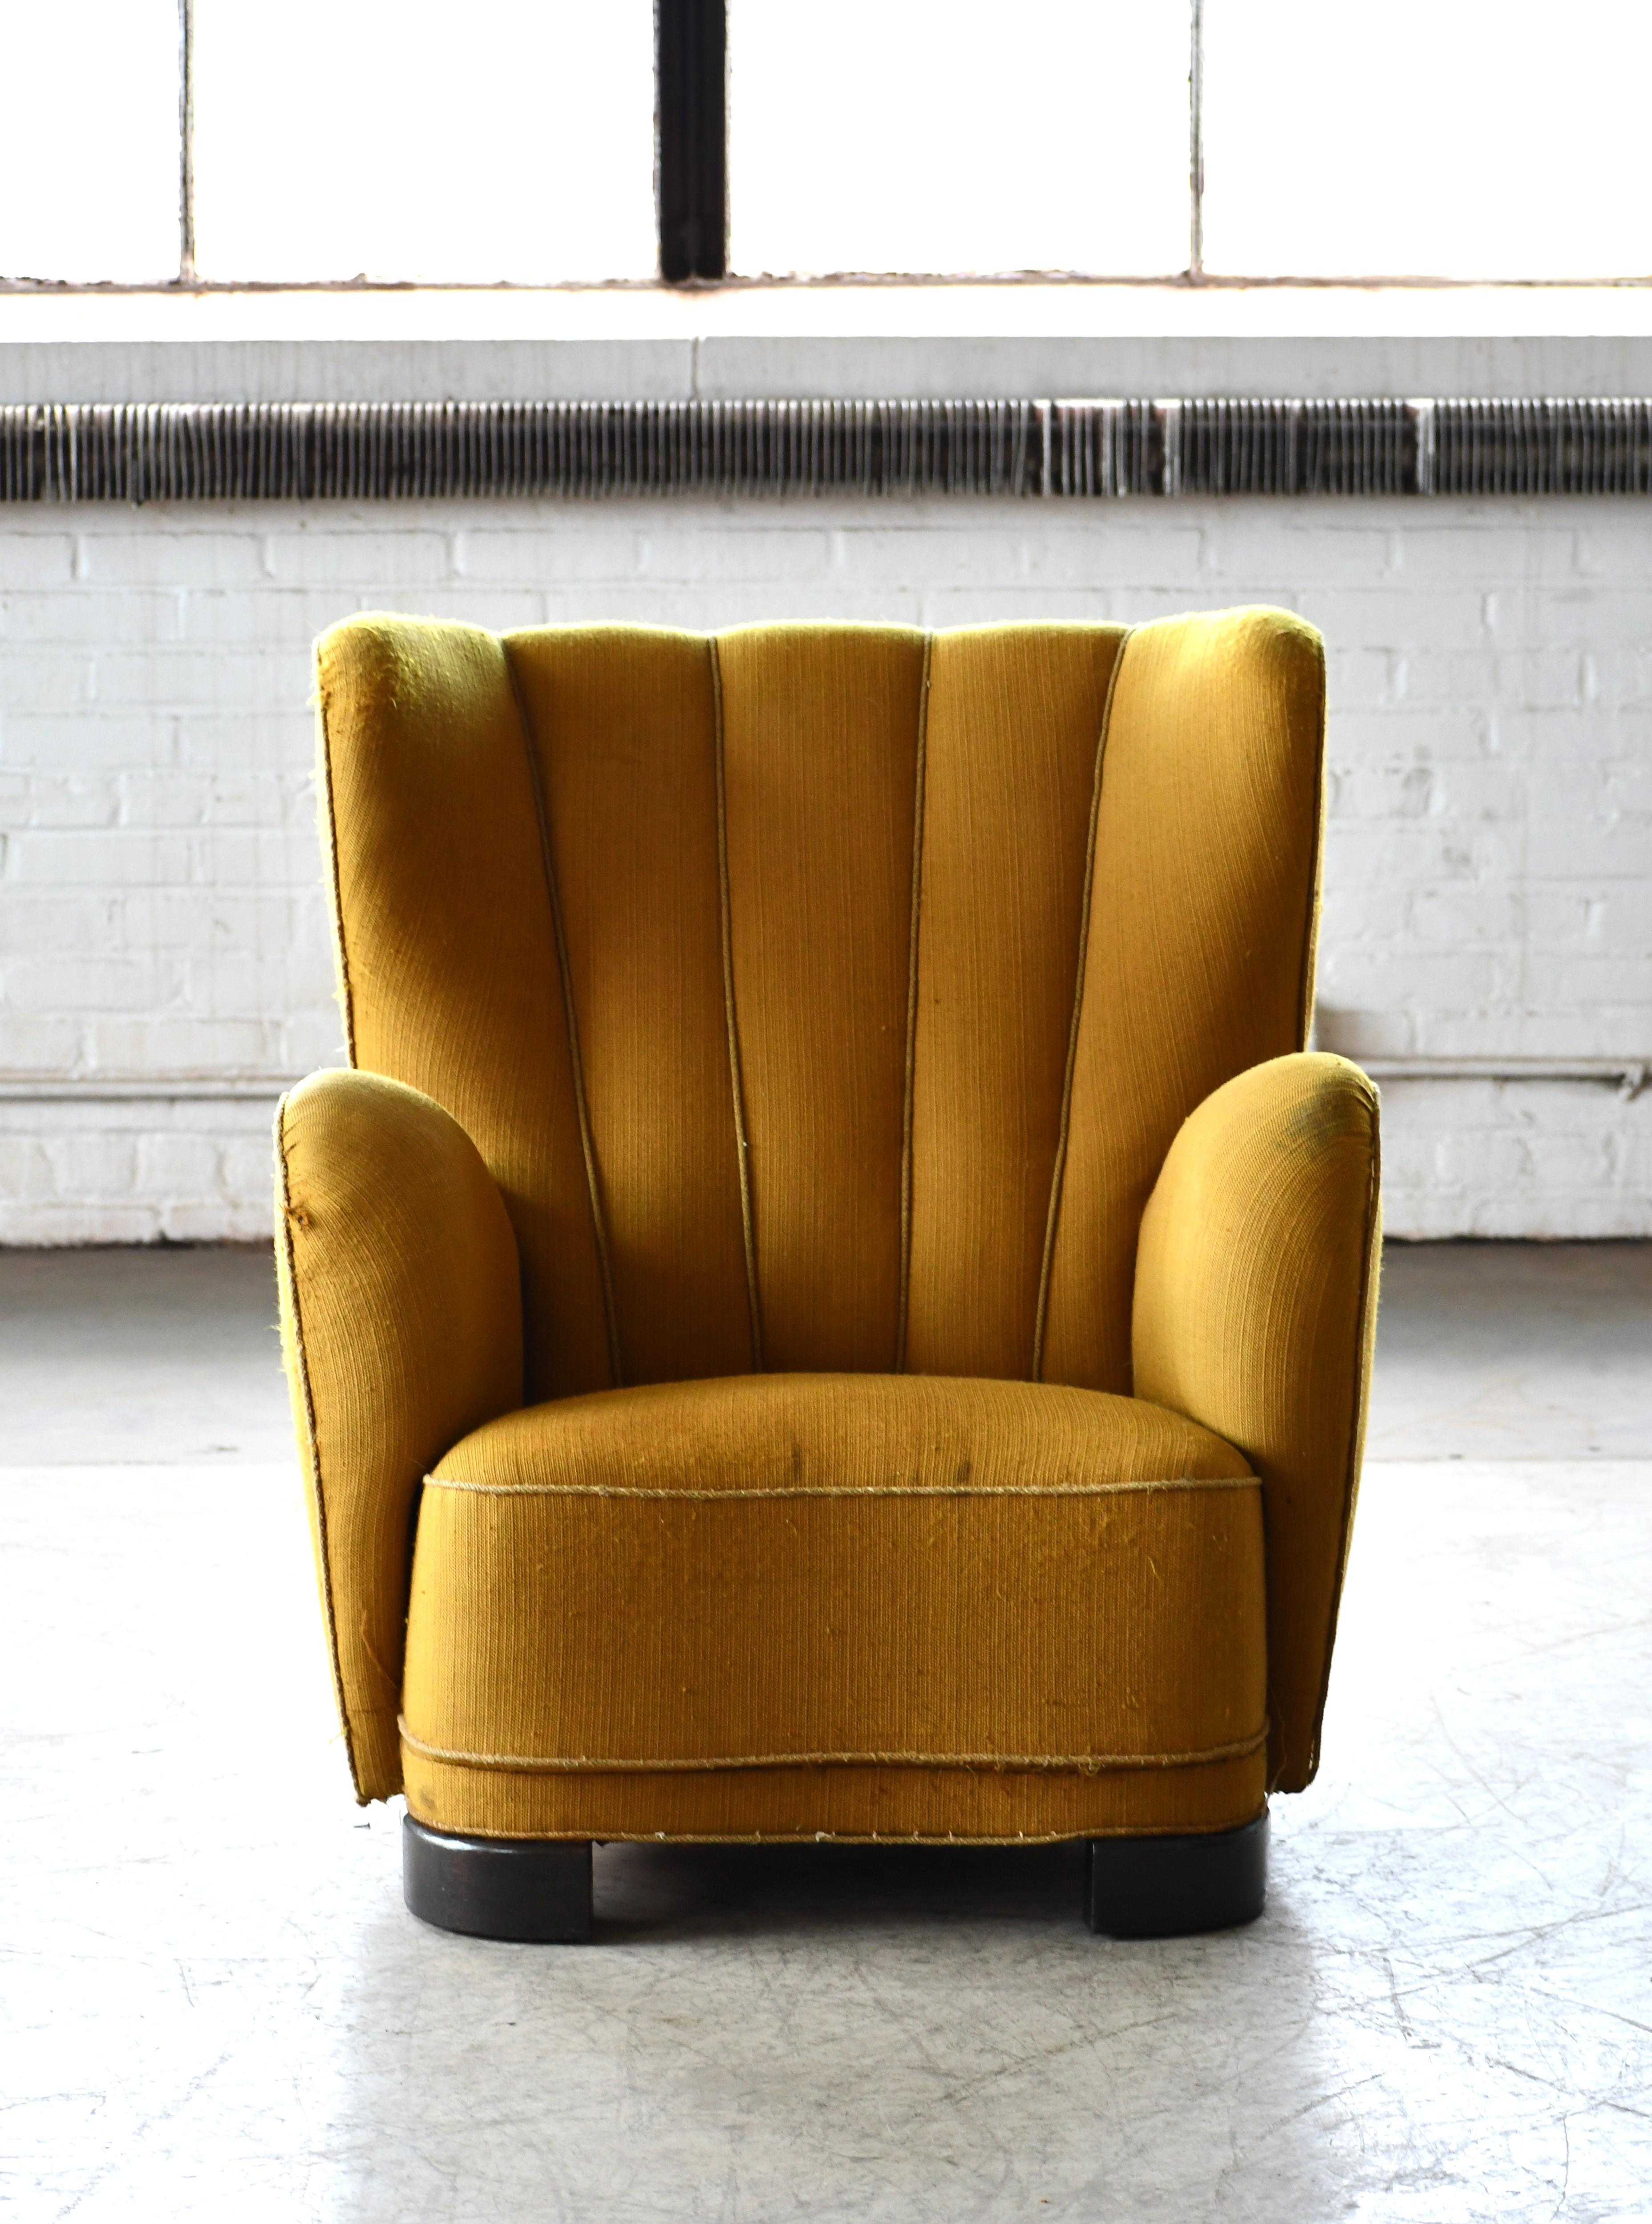 Fritz Hansen attributed 1940s Danish highback lounge chair in wool. Sublime highback lounge chair with channeled backrest made in Denmark in the late 1930s or early 1940s. This model chair is seen from time to time in the Danish market and is often